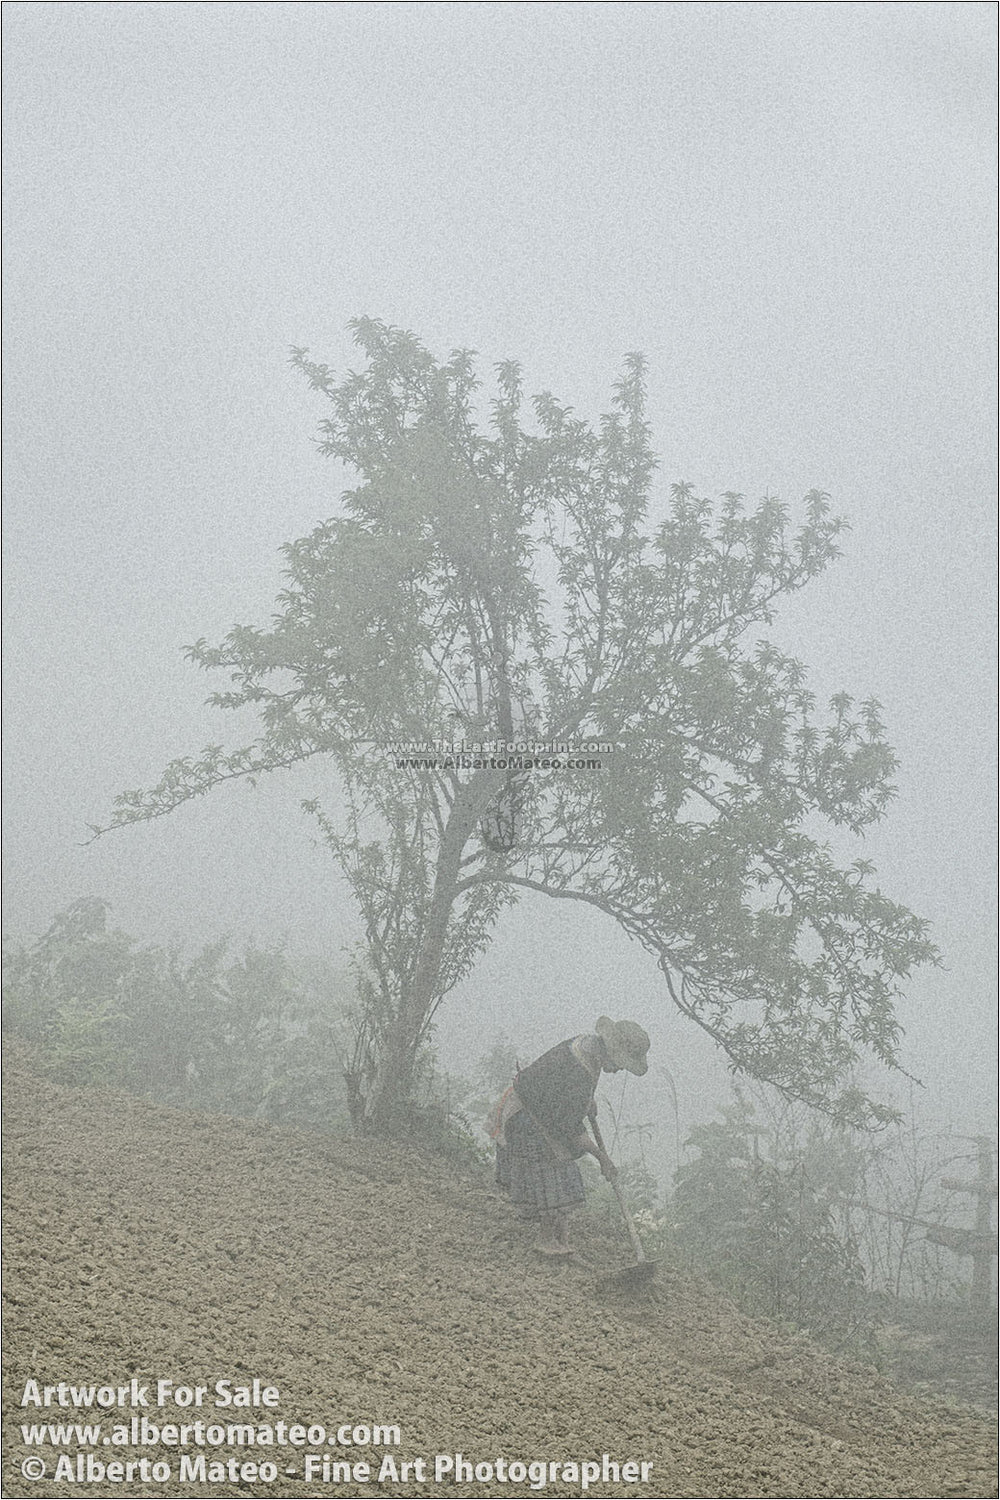 Hmong woman sowing in the fog, Bac Ha, Vietnam. | Open Edition Print.